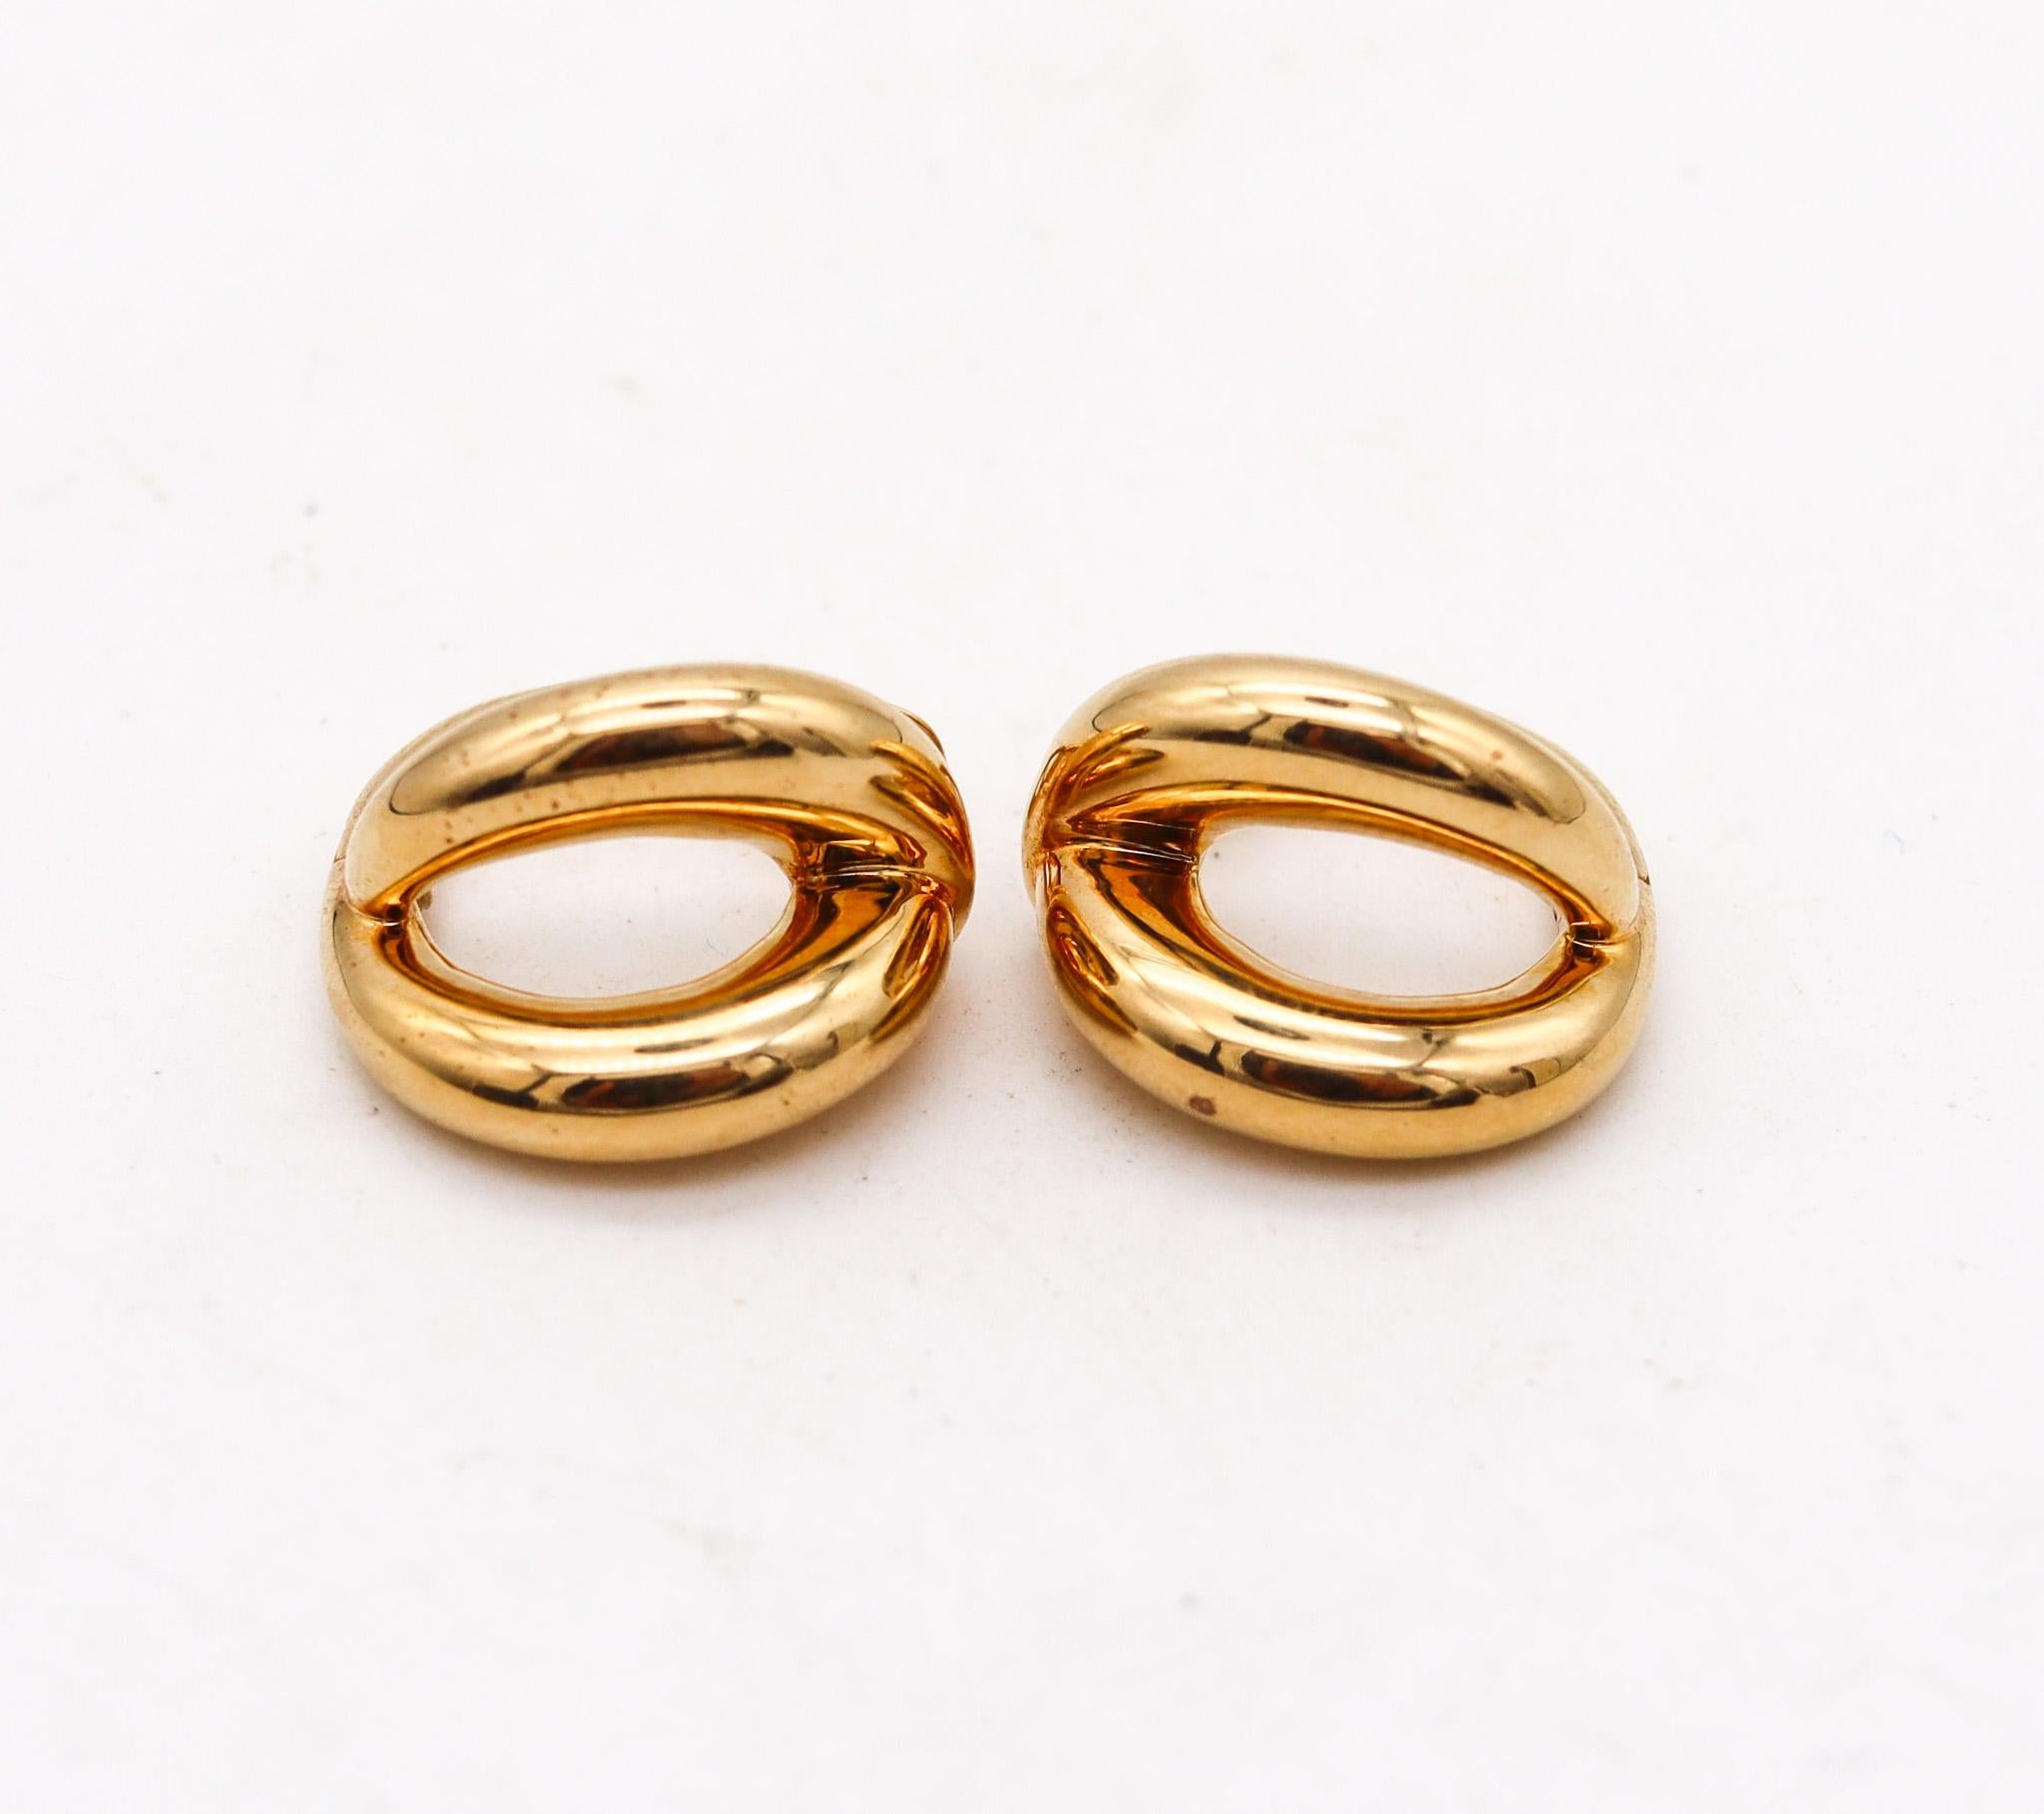 Clips-on earrings designed by Mauboussin.

Contemporary pair of earrings, created in Paris France by the jewelry house of Mauboussin. They were crafted in solid yellow gold of 18 karats with high polished finish. They were designed as a left and